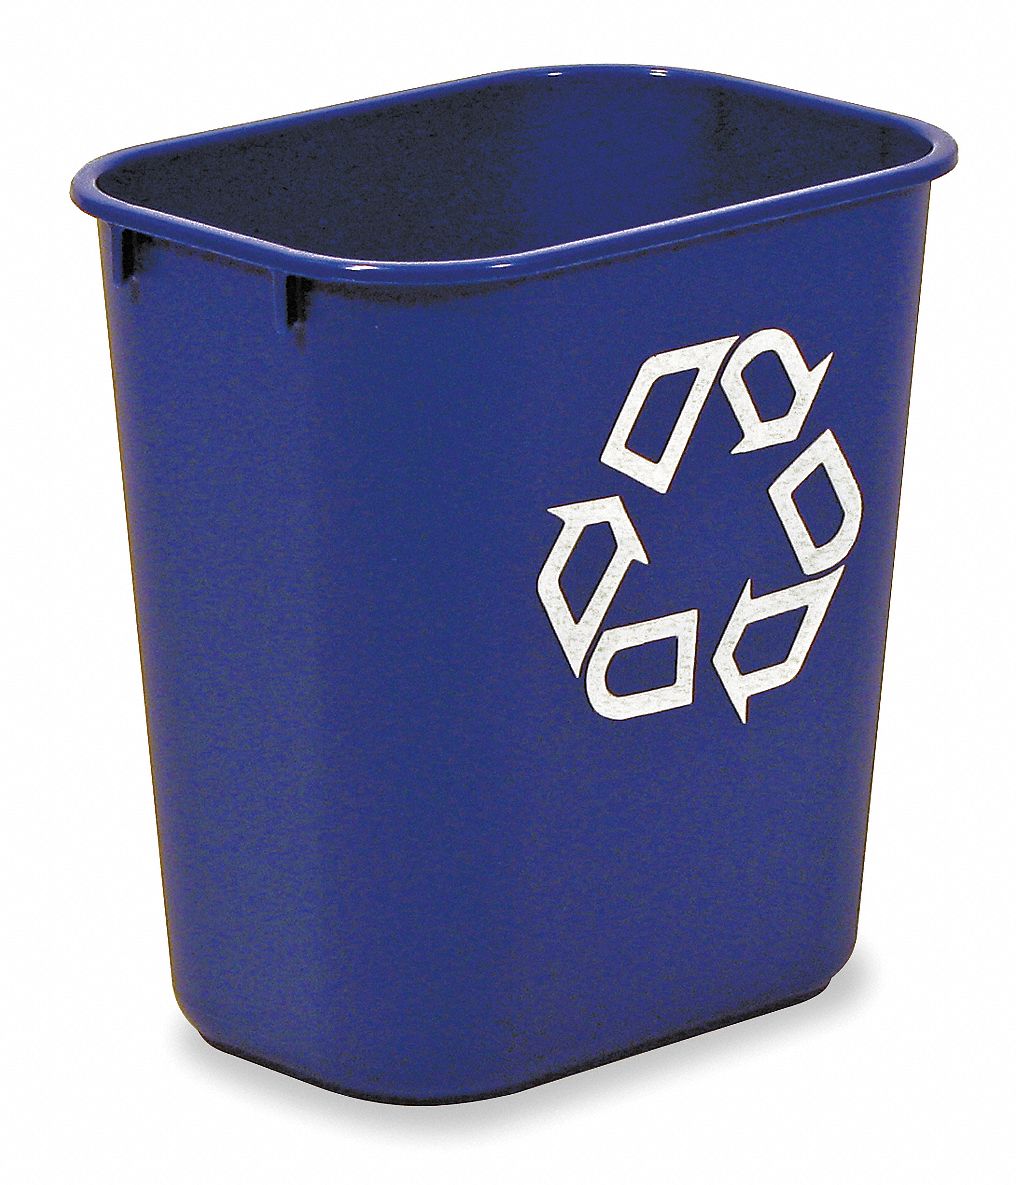 5M781 - Desk Recycling Container Blue 3-1/4 gal.